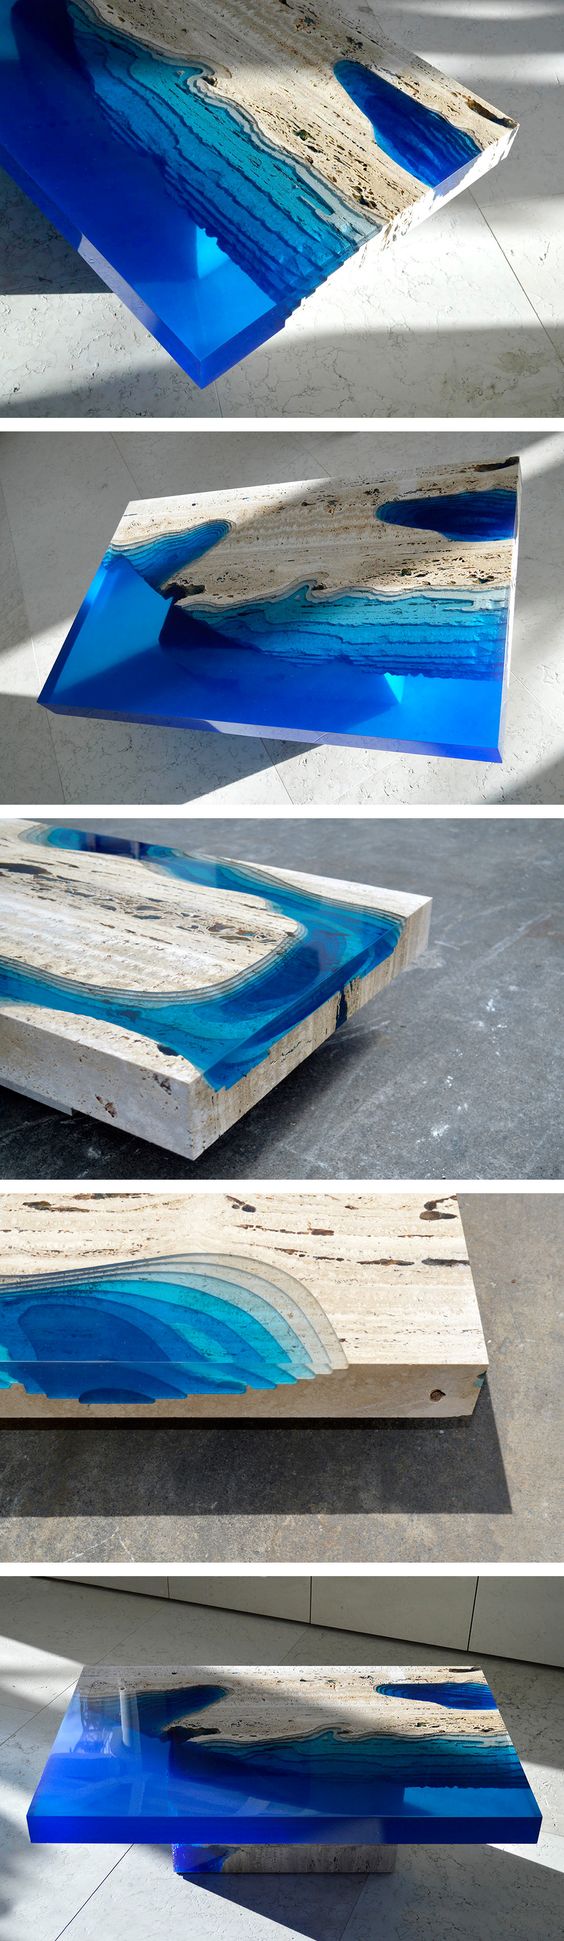 Cut Travertine Marble and Resin Merge to Create ‘Lagoon’ Tables